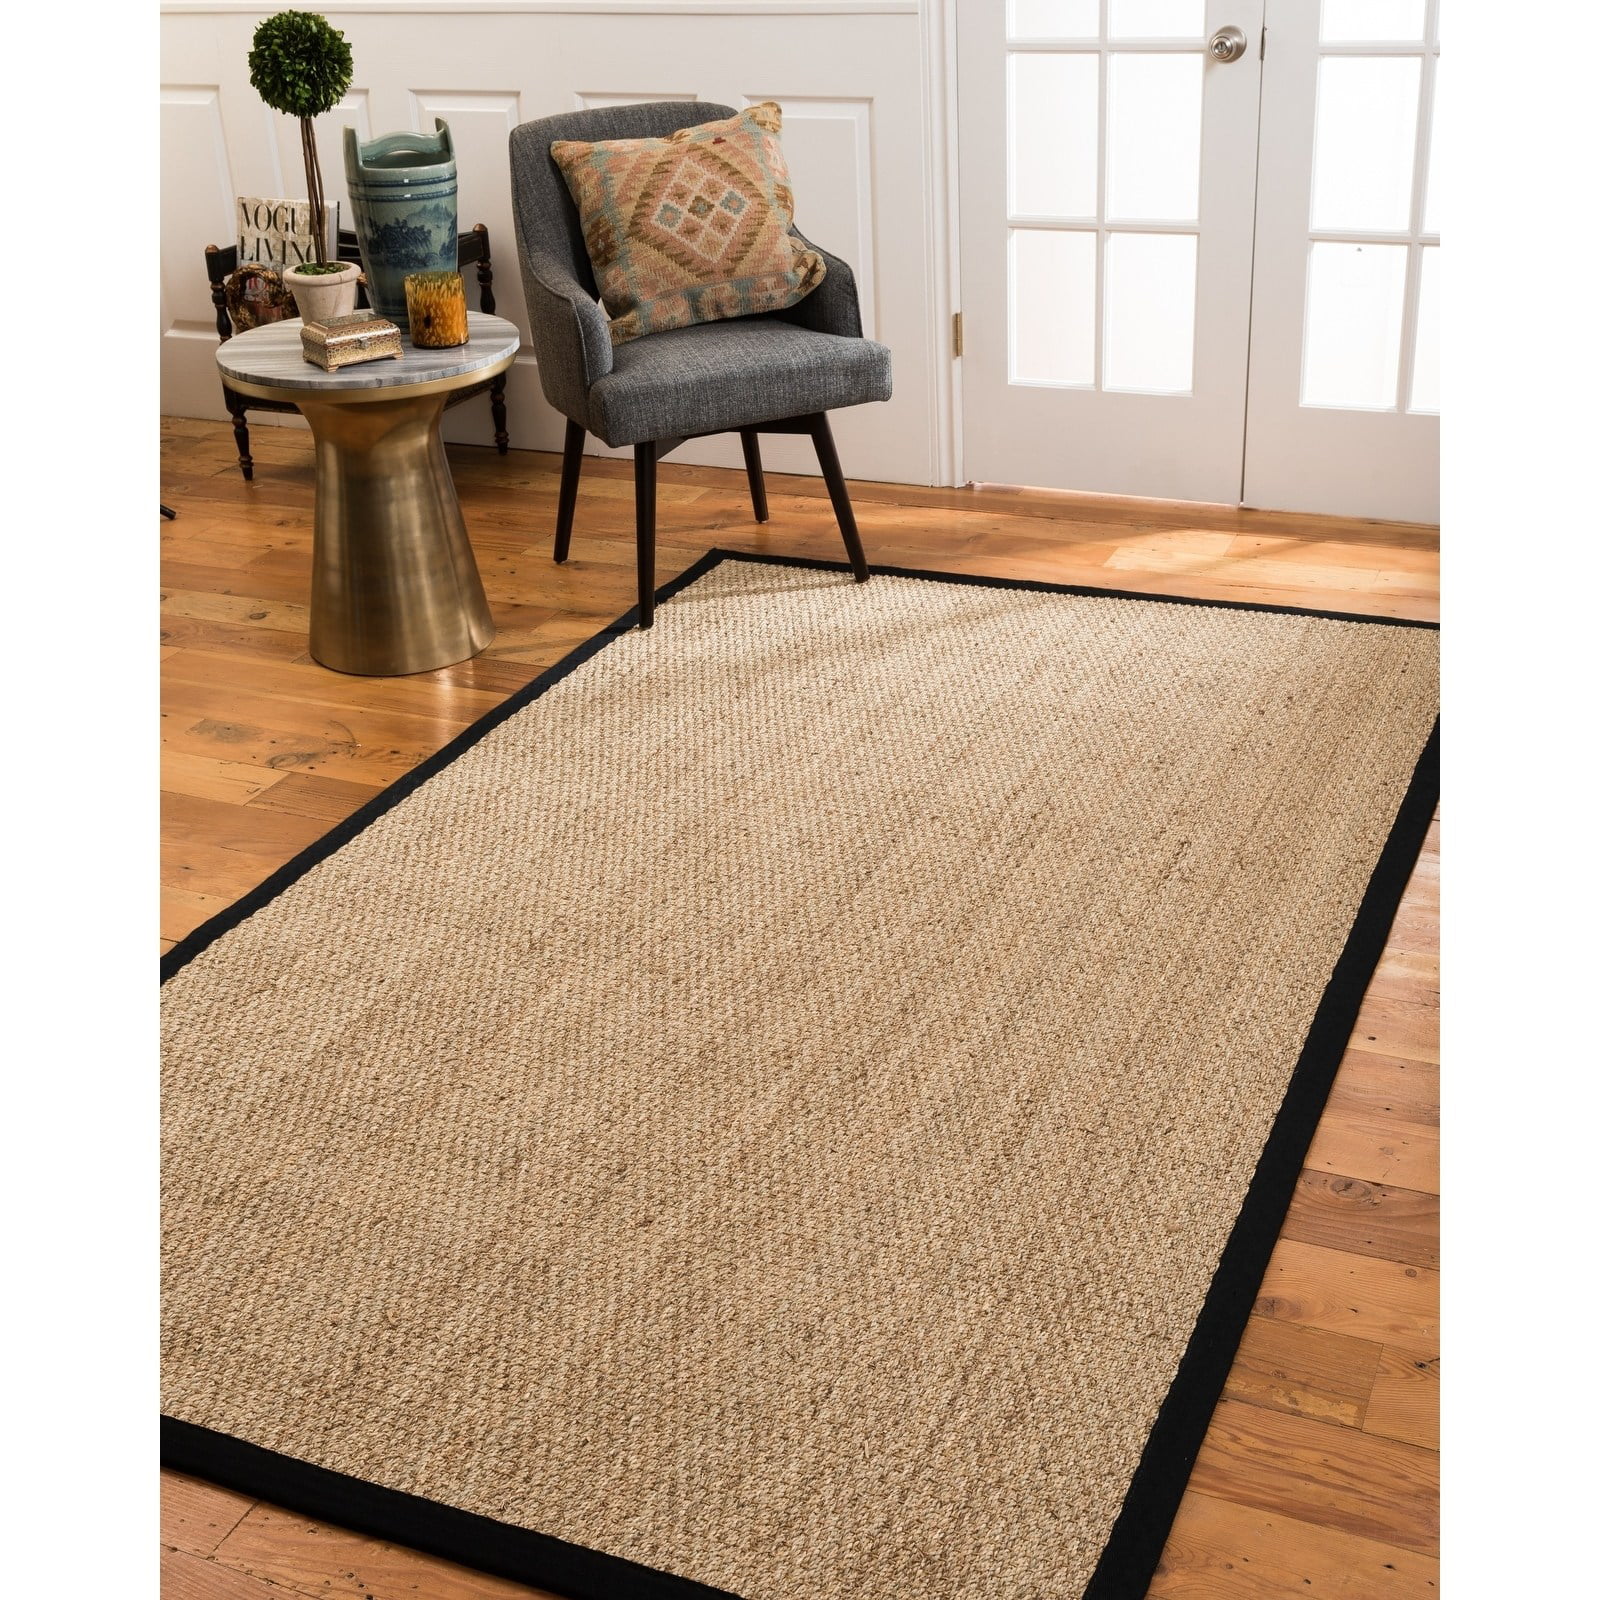 Natural Area Rugs, 5' x 8', Seagrass EcoFriendly Handcrafted Durable Black Maritime Rug